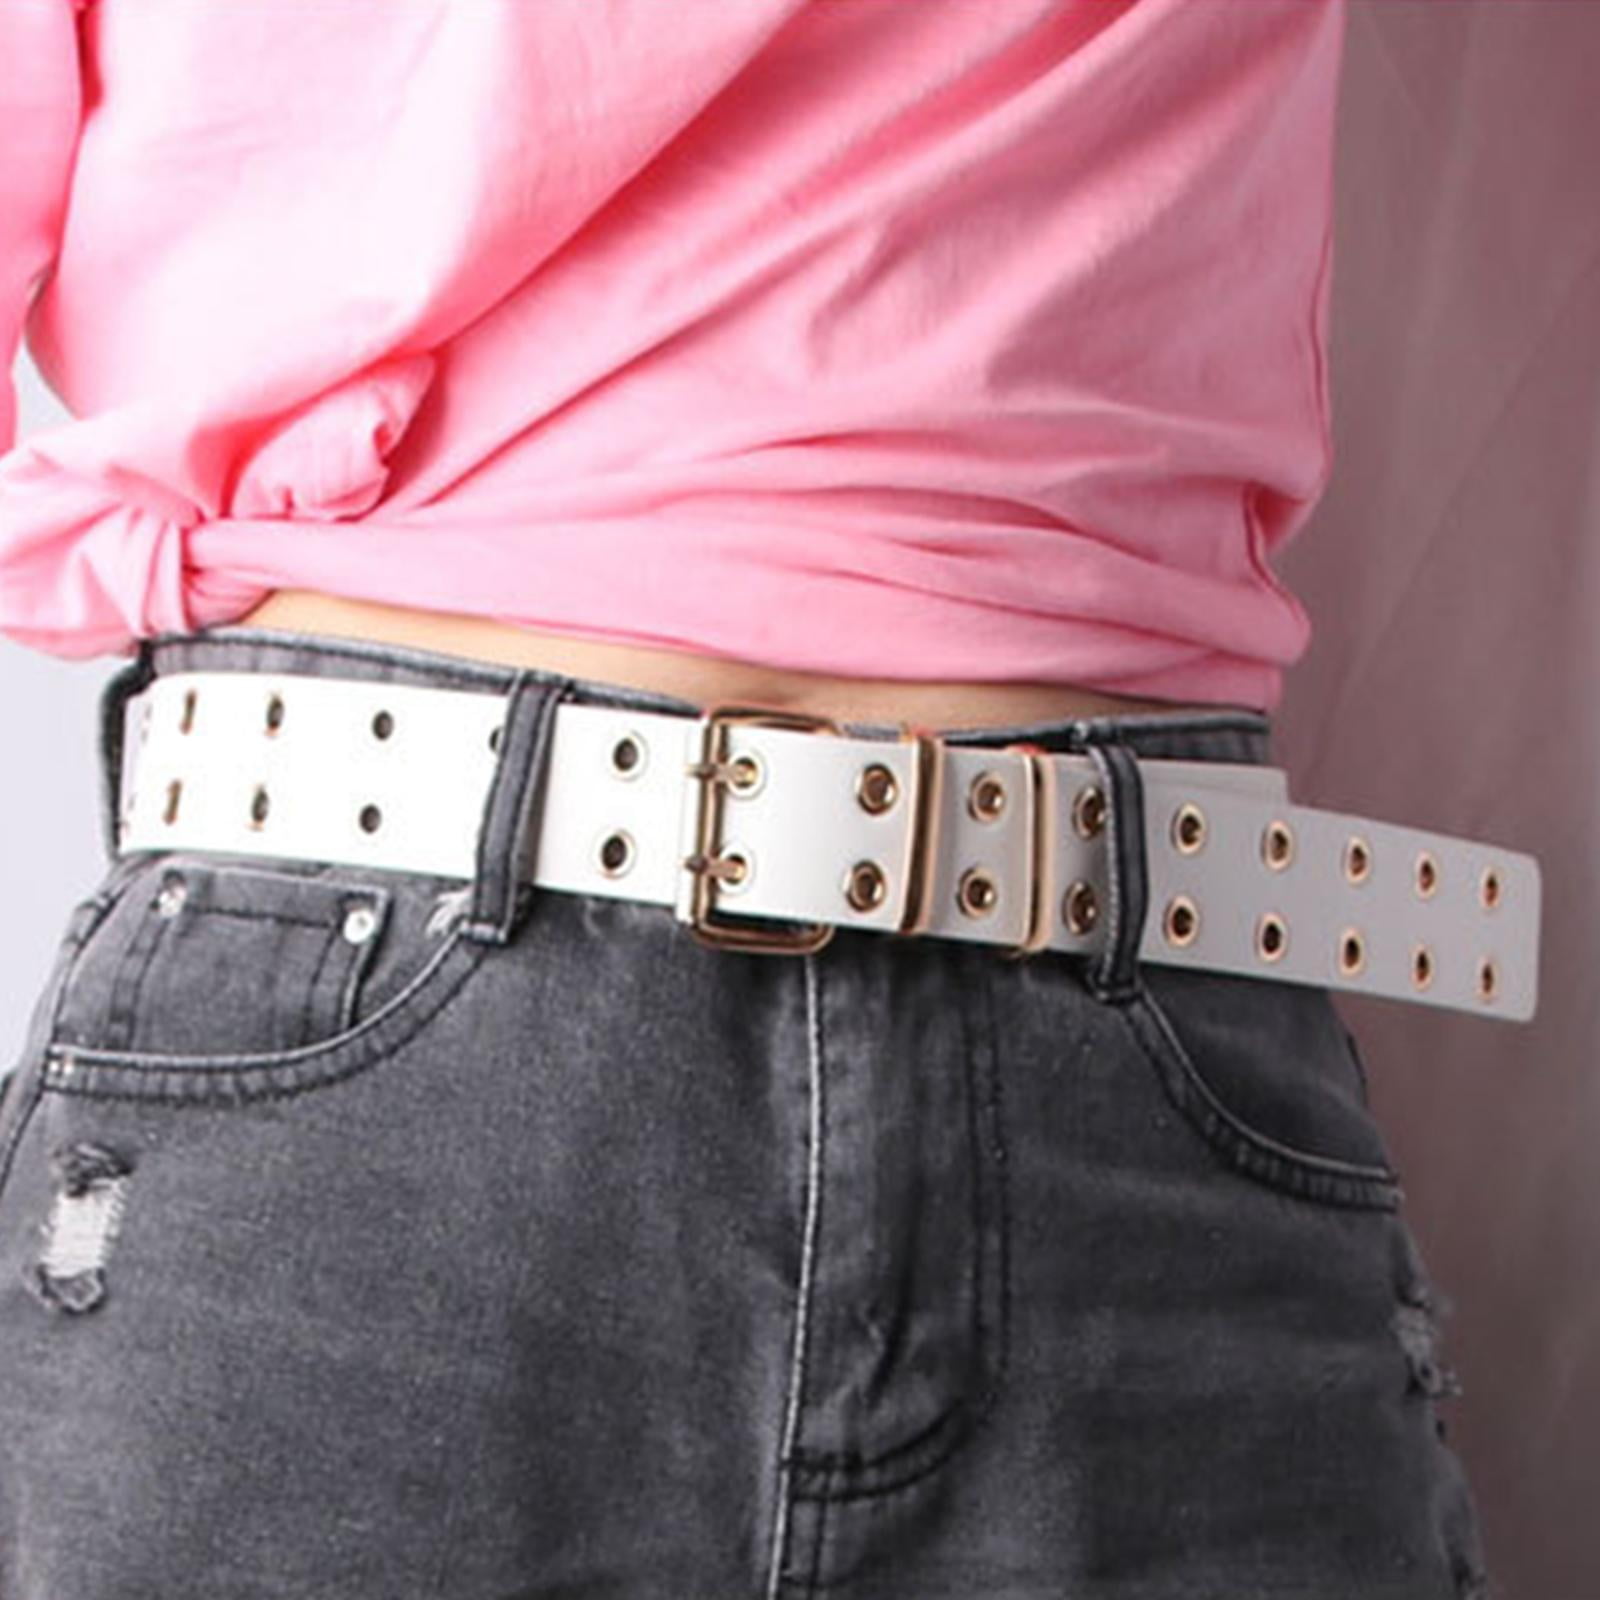 Double Grommet Punk Belt, Vintage Gothic Adjustable PU Leather Fashion  Hollow Eyelet Accessories, with for Pants Jeans. , White